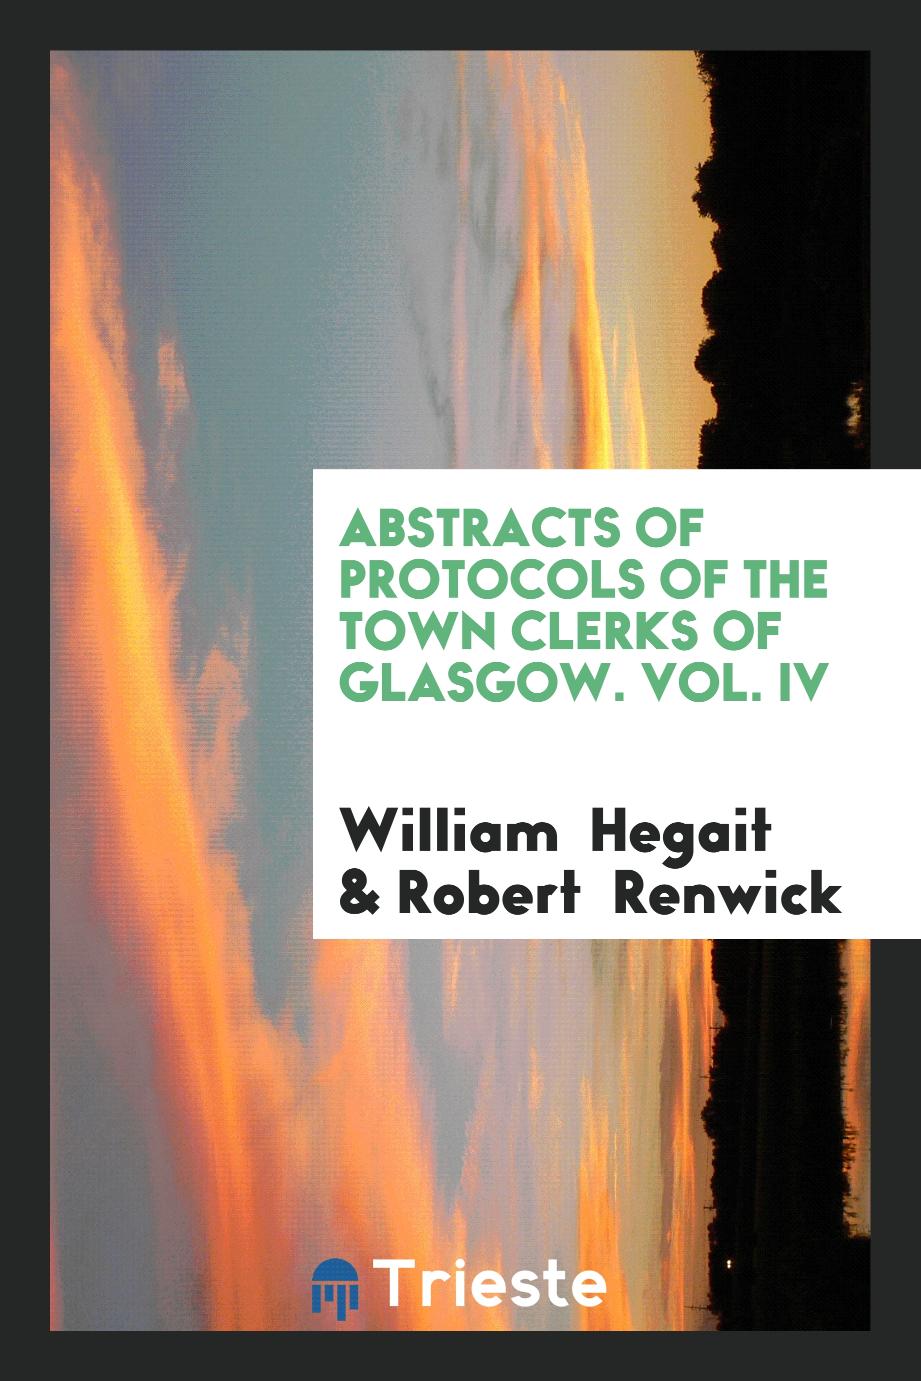 Abstracts of Protocols of the Town Clerks of Glasgow. Vol. IV